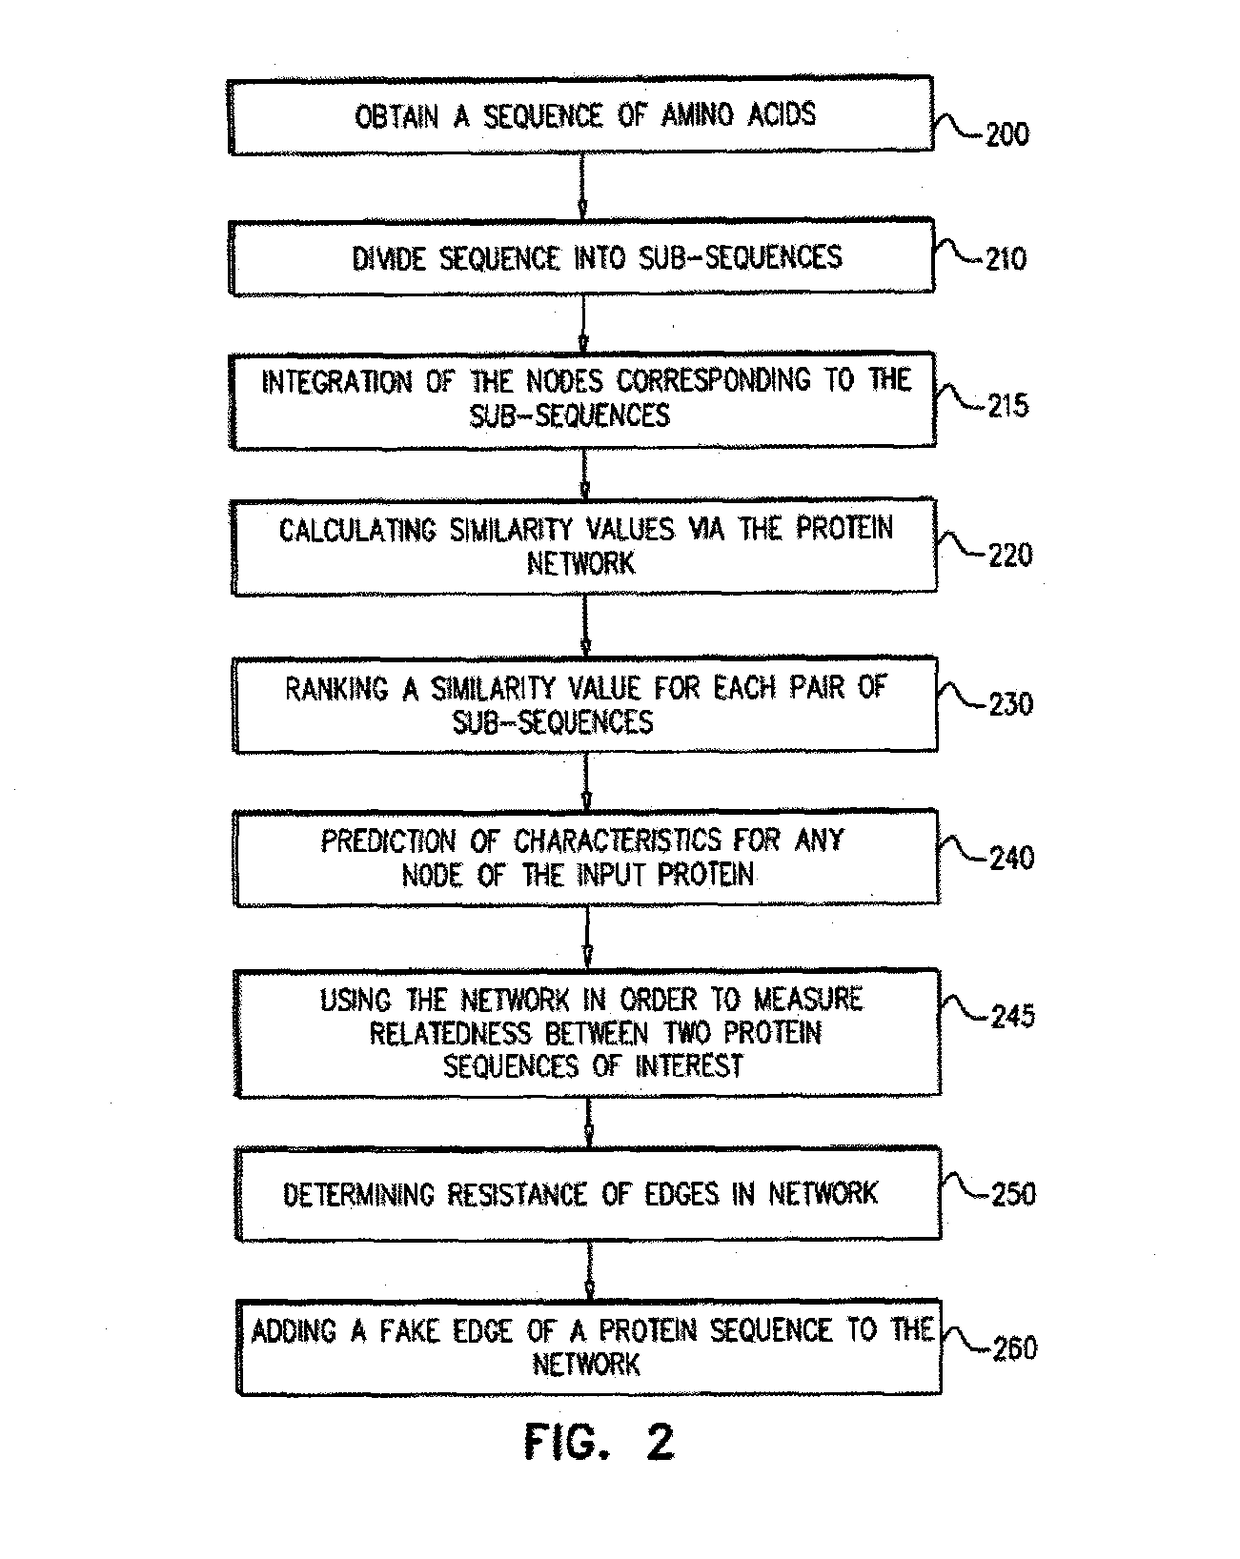 System and method for generating detection of hidden relatedness between proteins via a protein connectivity network